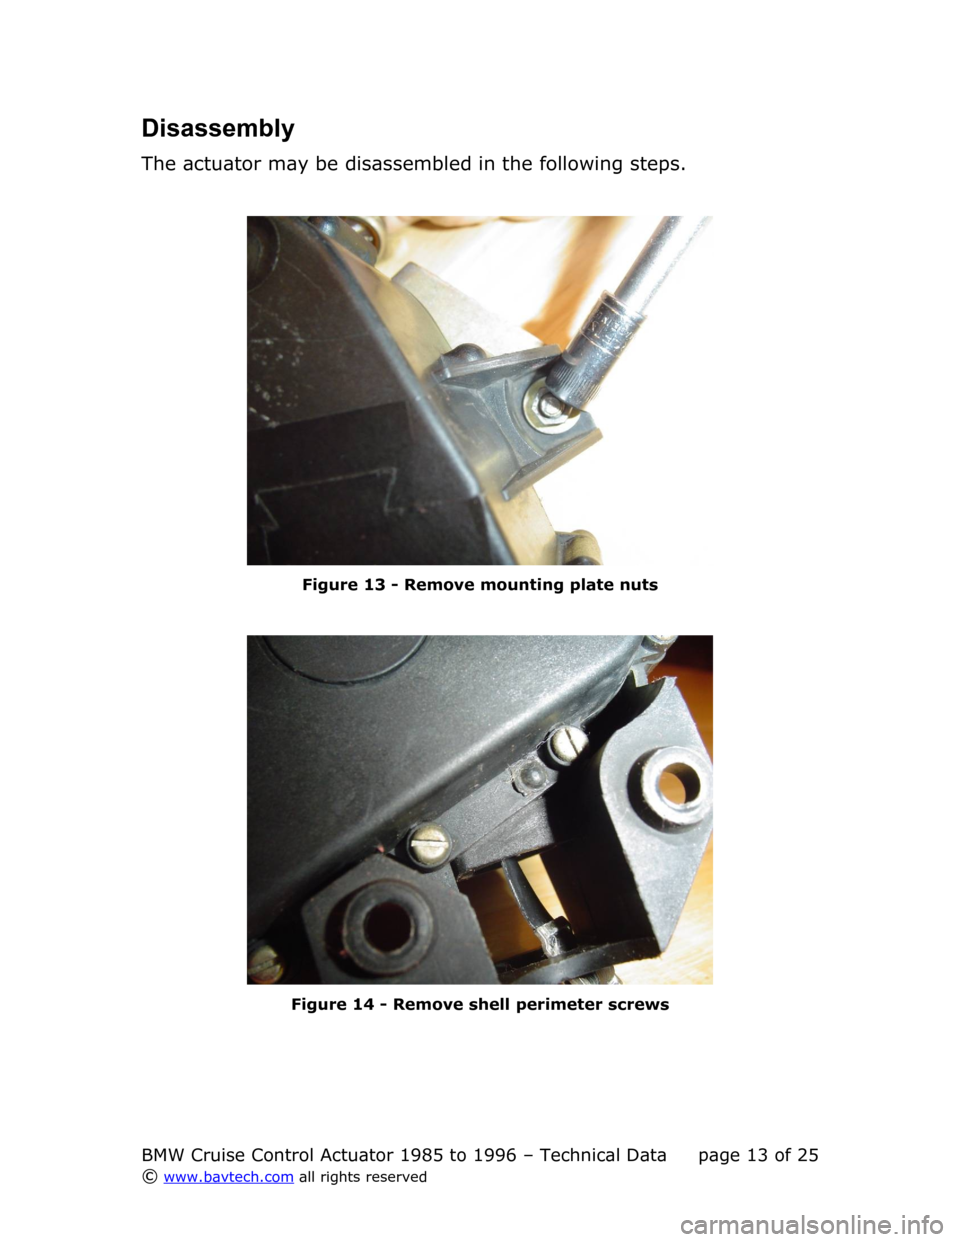 BMW 7 SERIES 1989 E32 Cruise Control Acutator Disassembly
The actuator may be disassembled in the following steps.
Figure  13  - Remove mounting plate nuts
Figure  14  - Remove shell perimeter screws
BMW Cruise Control Actuator 1985 to 1996 – T